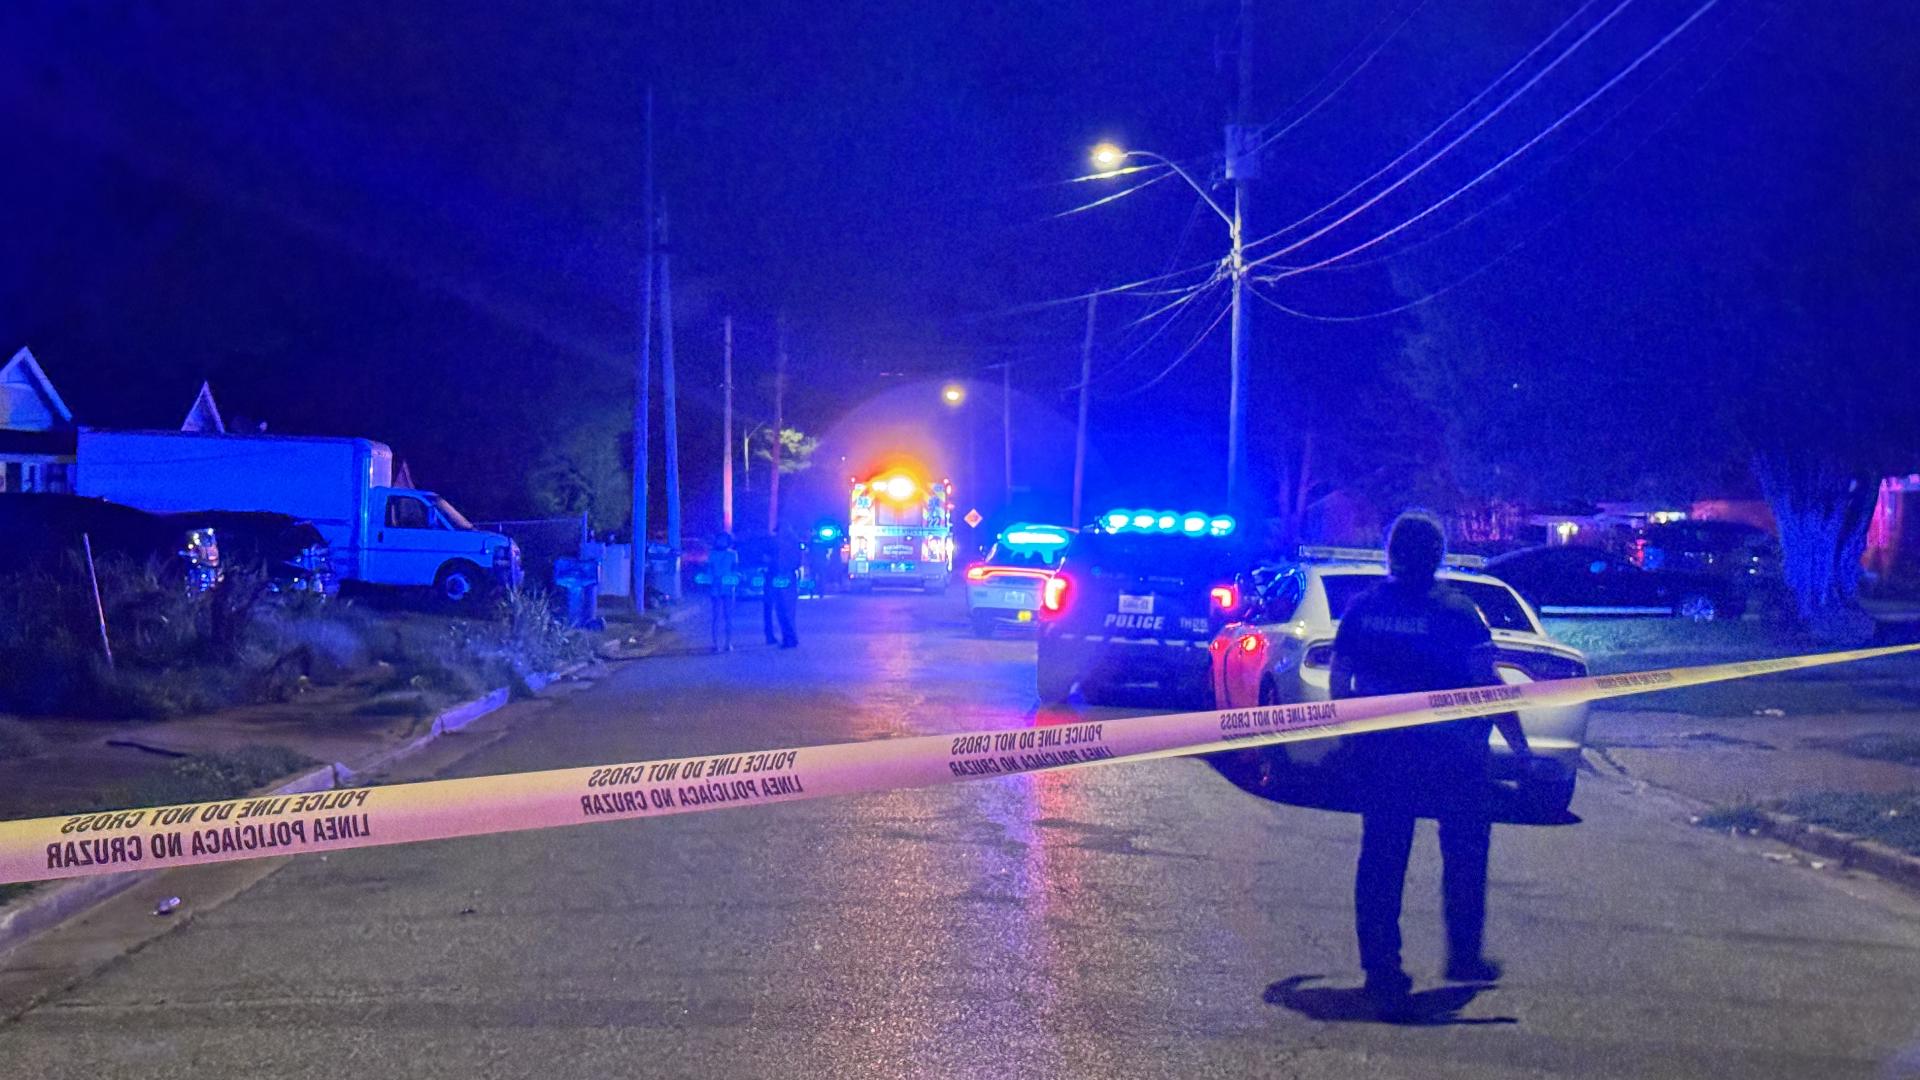 The Memphis Police Department received a shooting call Wednesday, May 15, around 3:30 a.m. and sent officers to the 2500 block of Heard Avenue.